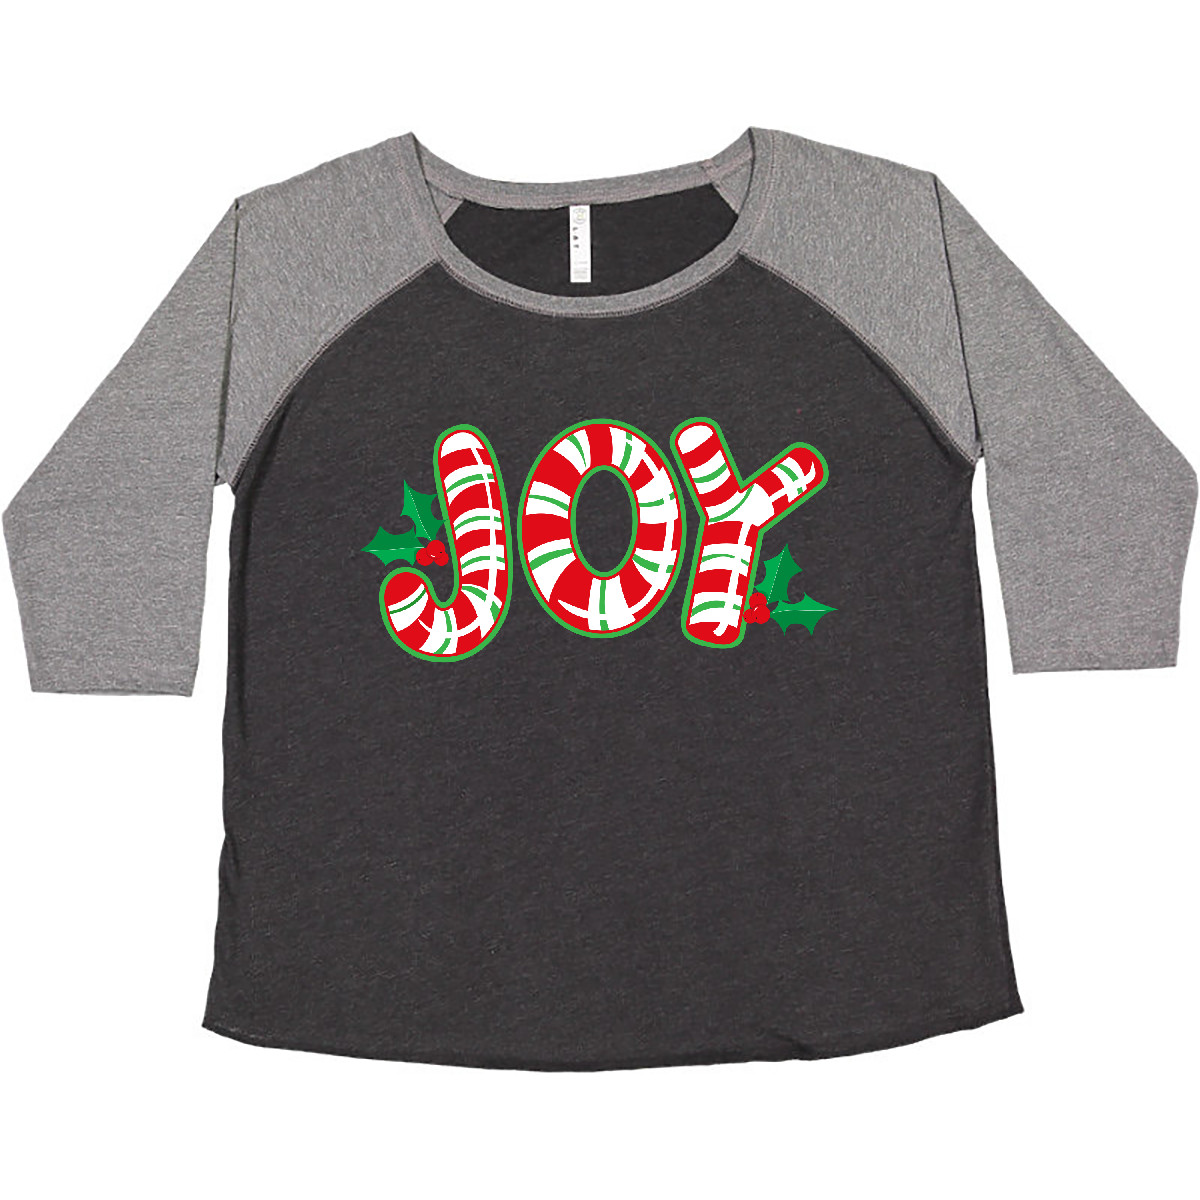 Plus Size Christmas Shirts, Plus Size Holiday Tops